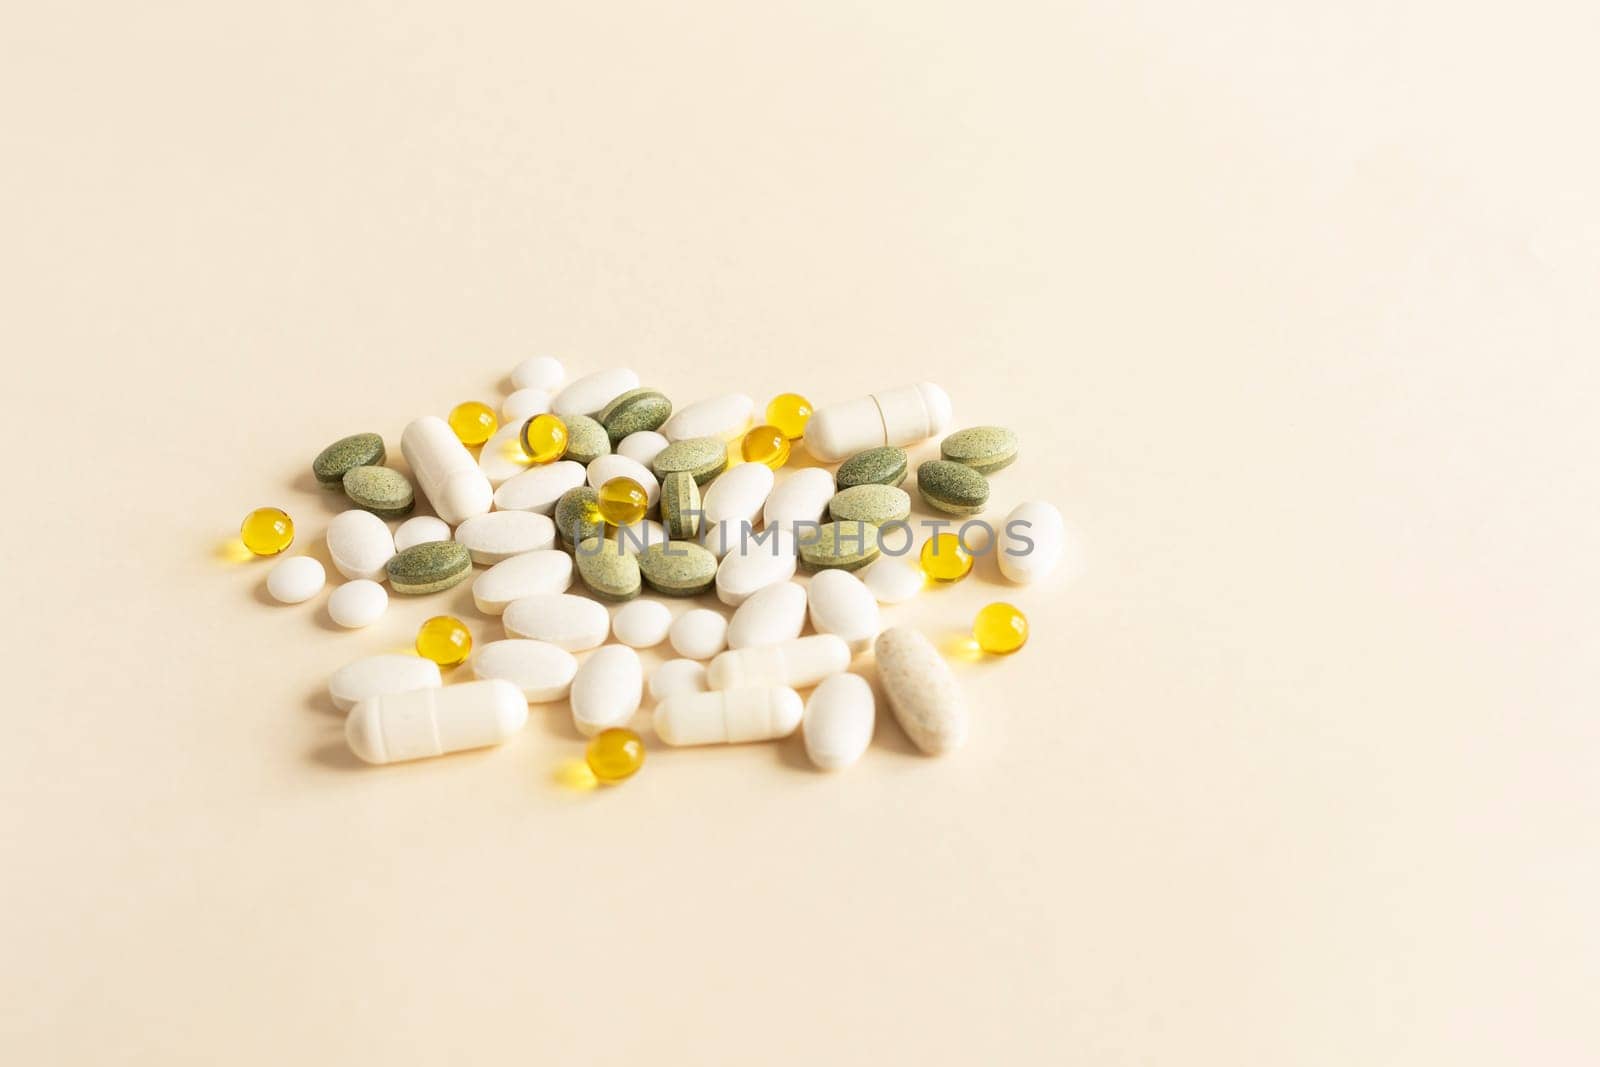 Assorted Pile of Colorful Pills, Green White Yellow, Beige Tablets, Capsules, Medical Supplement on Beige Background. Pharmaceutical concept. Copy Space For Text. Horizontal Plane. High quality photo